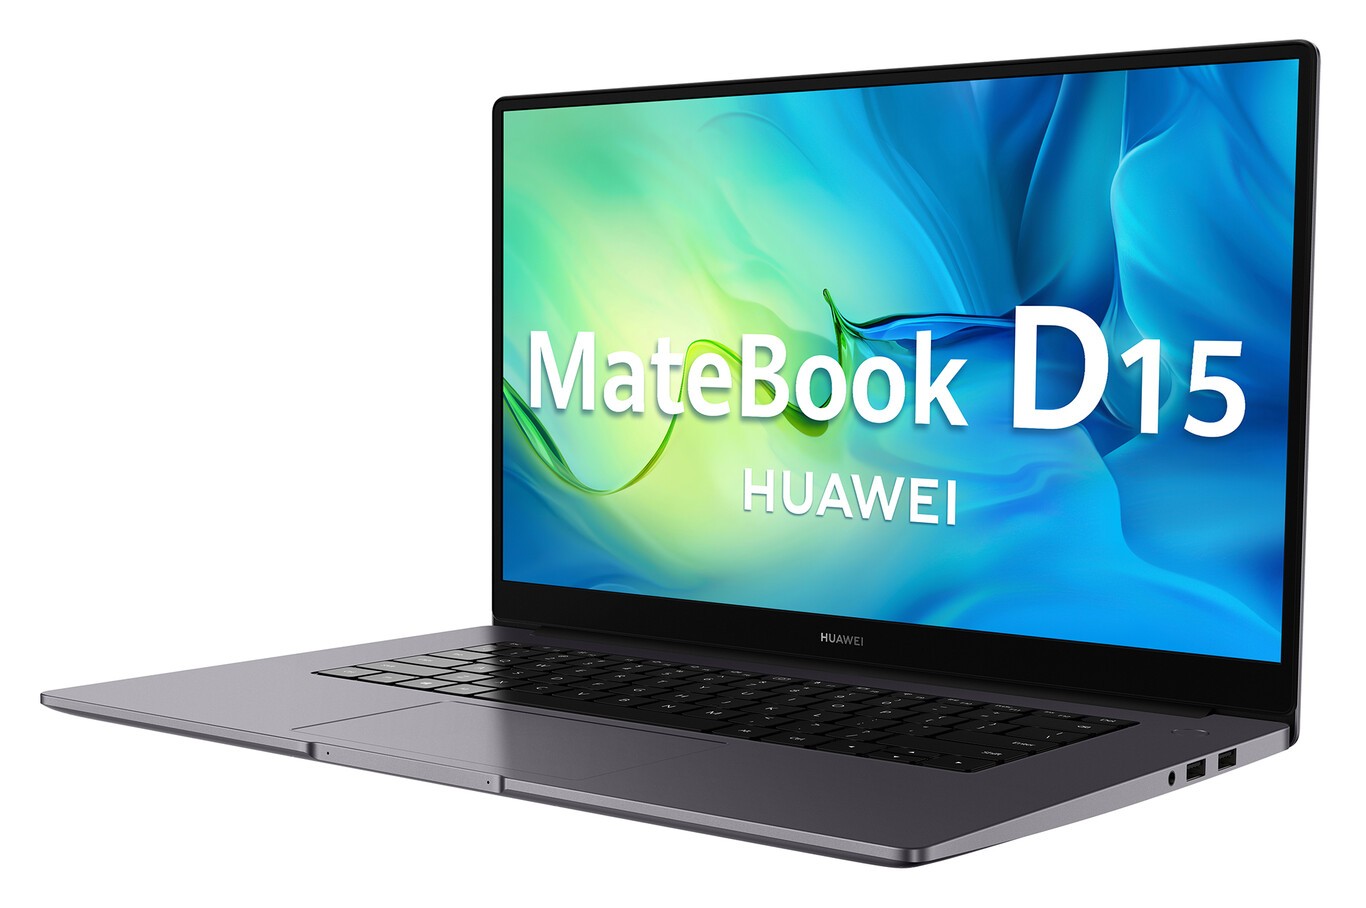 A product picture of aHuawei Matebook laptop, currently on Black Friday sale on Amazon